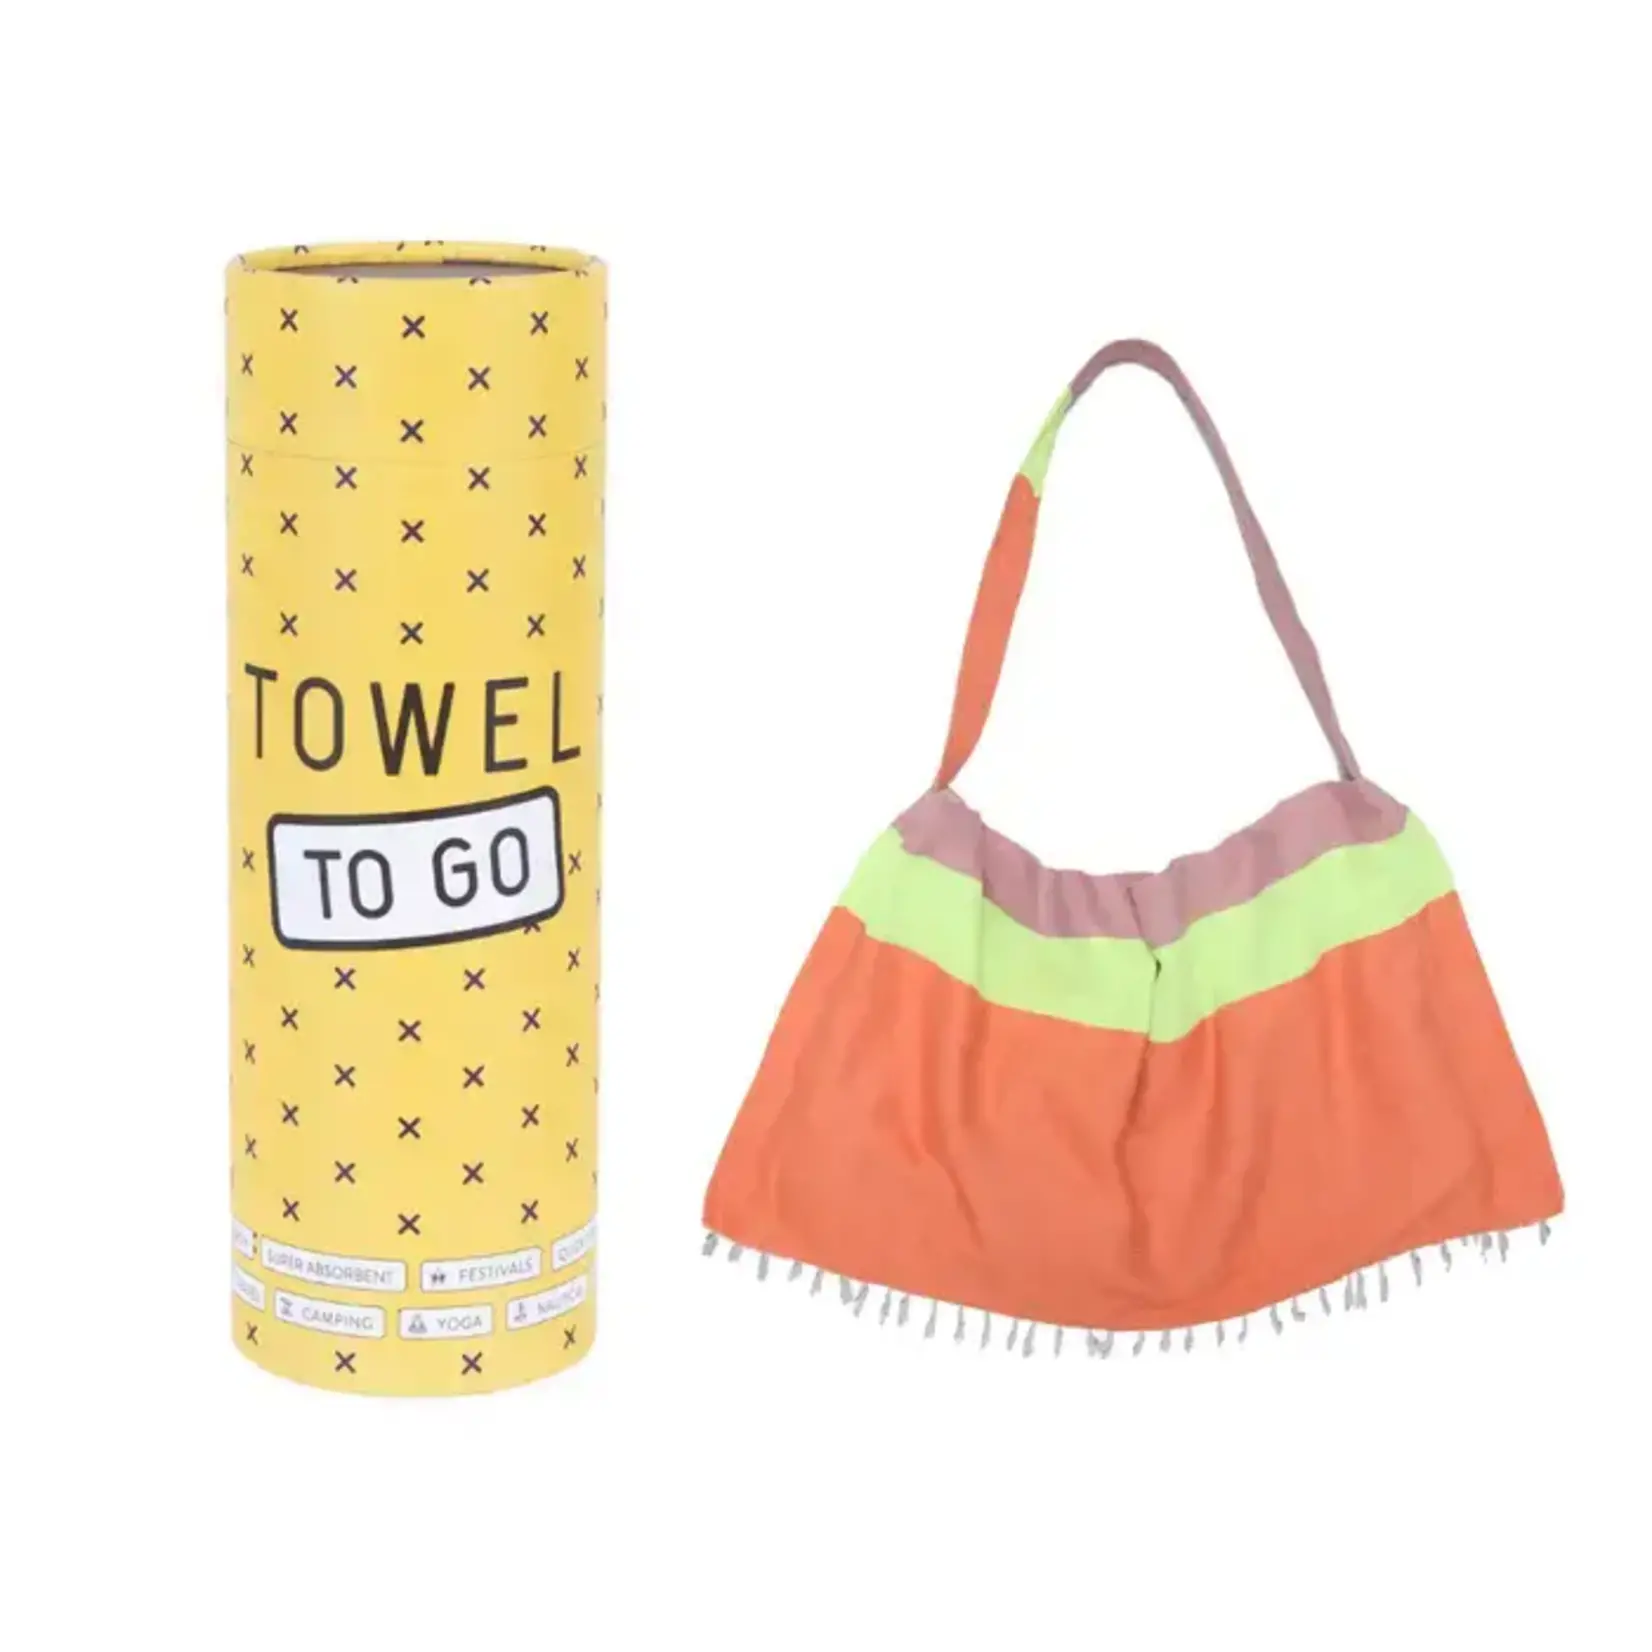 TOWEL TO GO Hamamtuch und Tasche „Two-in-One“ Rot/Rosa